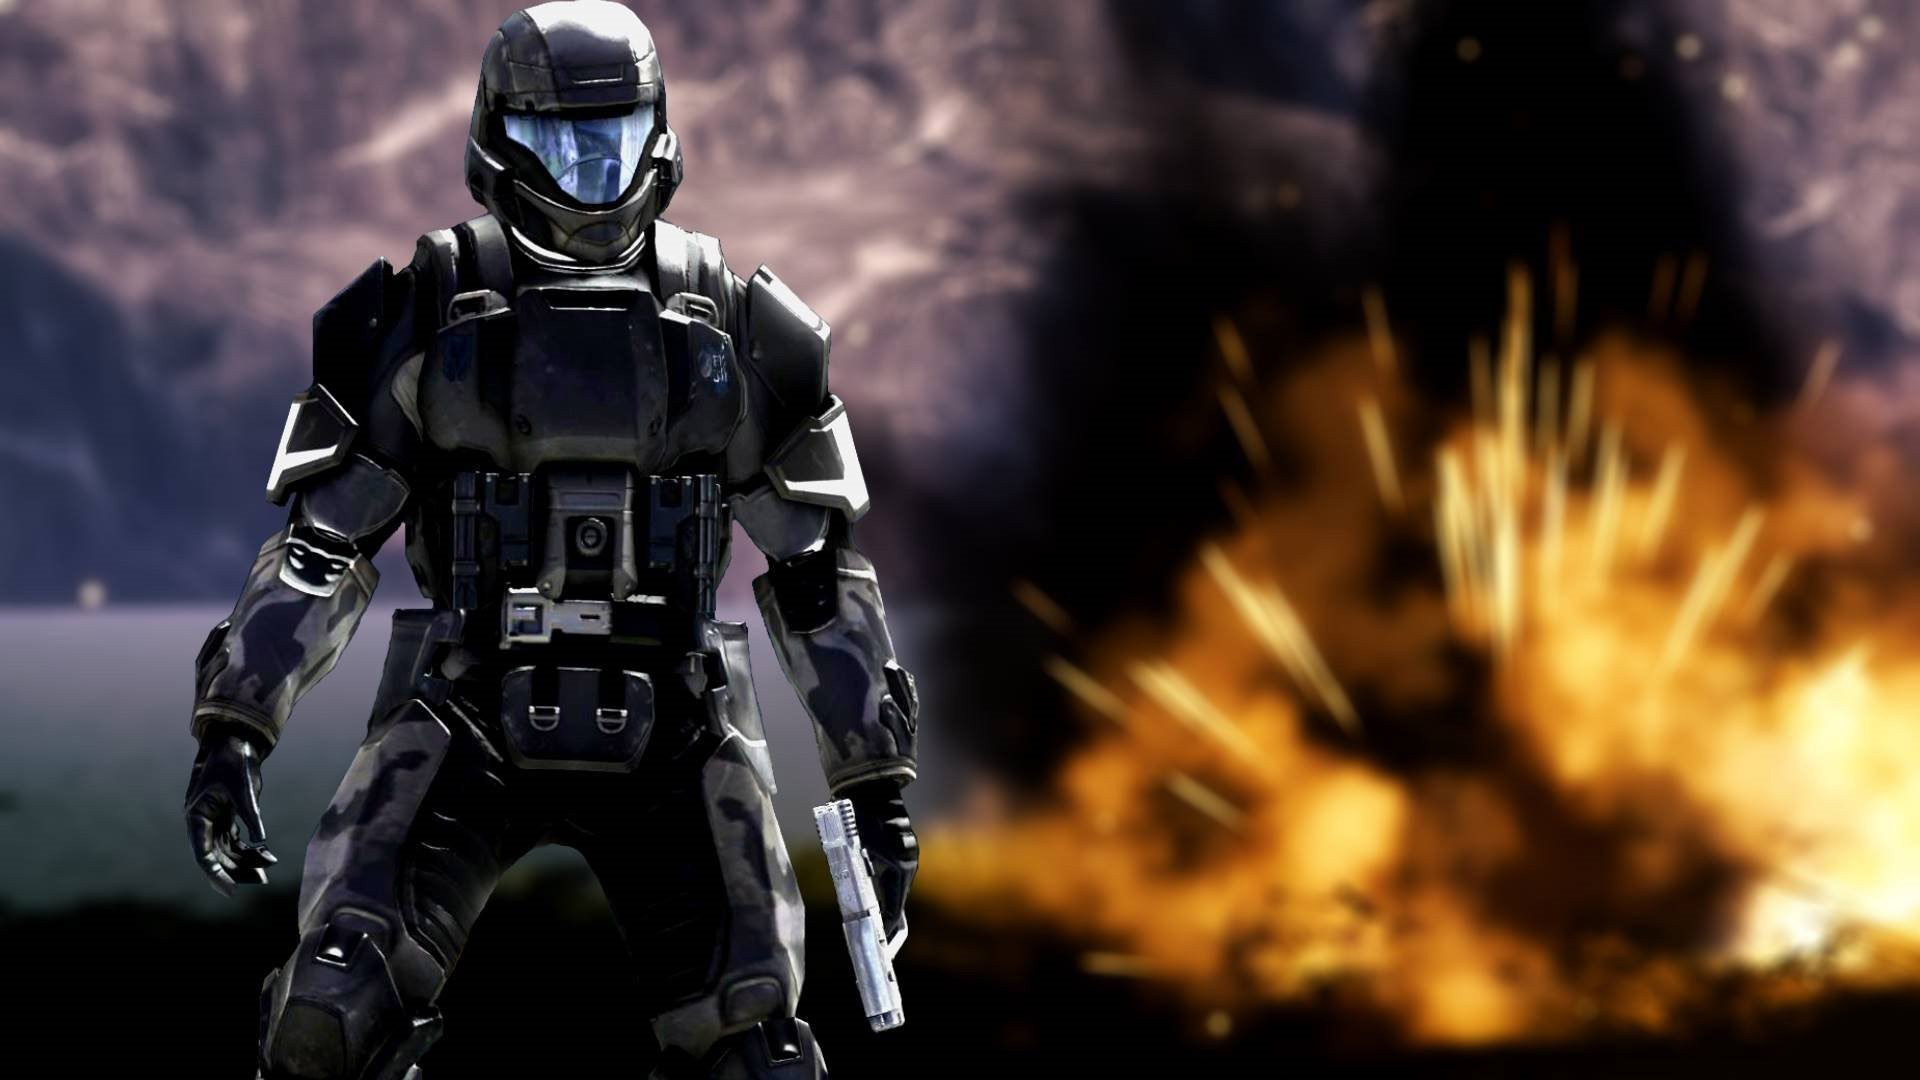 Master Chief Halo Wallpaper Image Amp Pictures Becuo